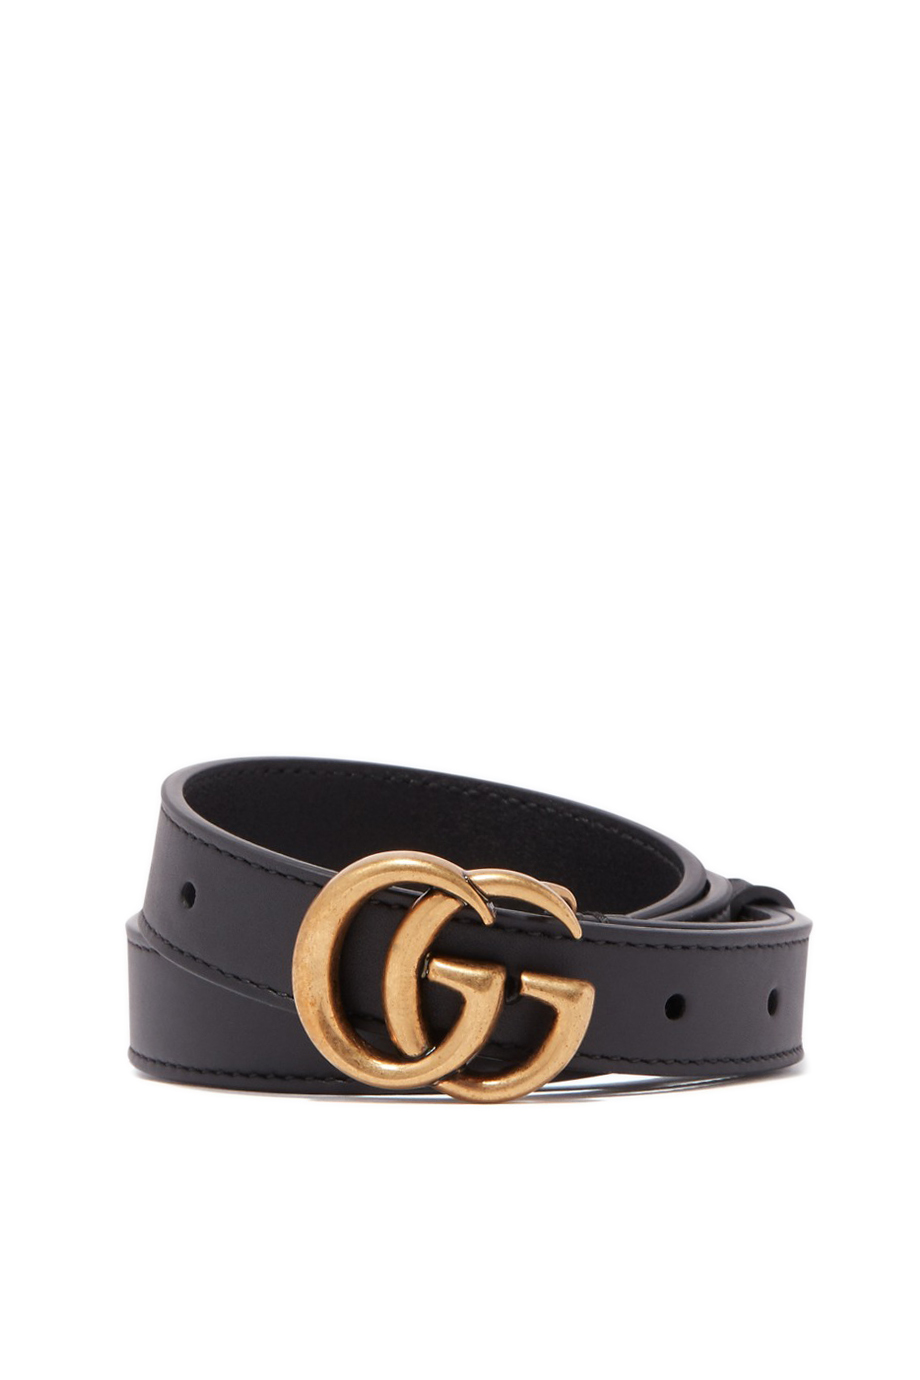 Buy Gucci Double G Leather Belt for Womens | Bloomingdale's UAE